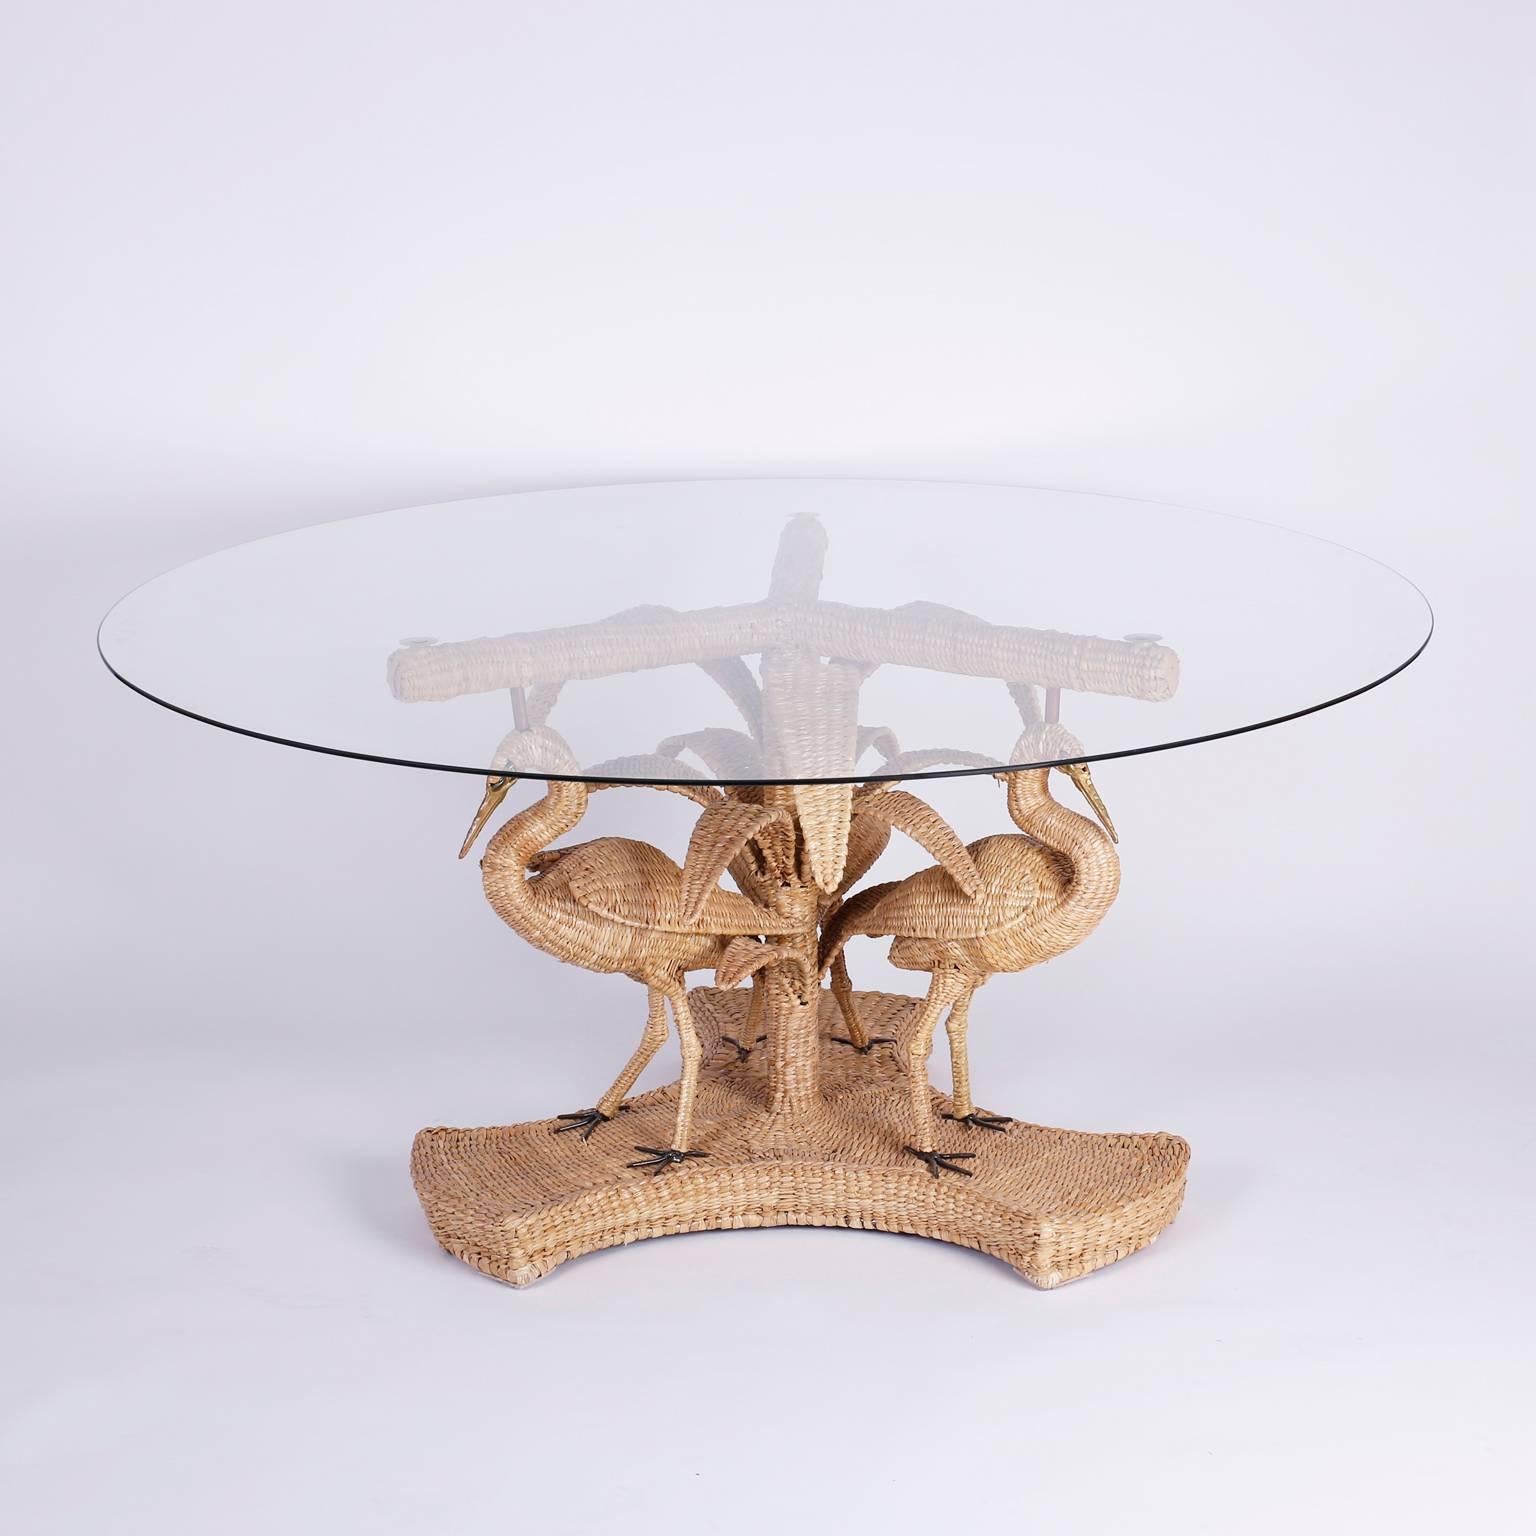 Whimsical wicker or reed table featuring a Palm Tree pedestal and large birds, possible Egrets or Herons with brass eyes, beaks, and feet. The expertly woven rattan reed is tightly wound around a metal form.